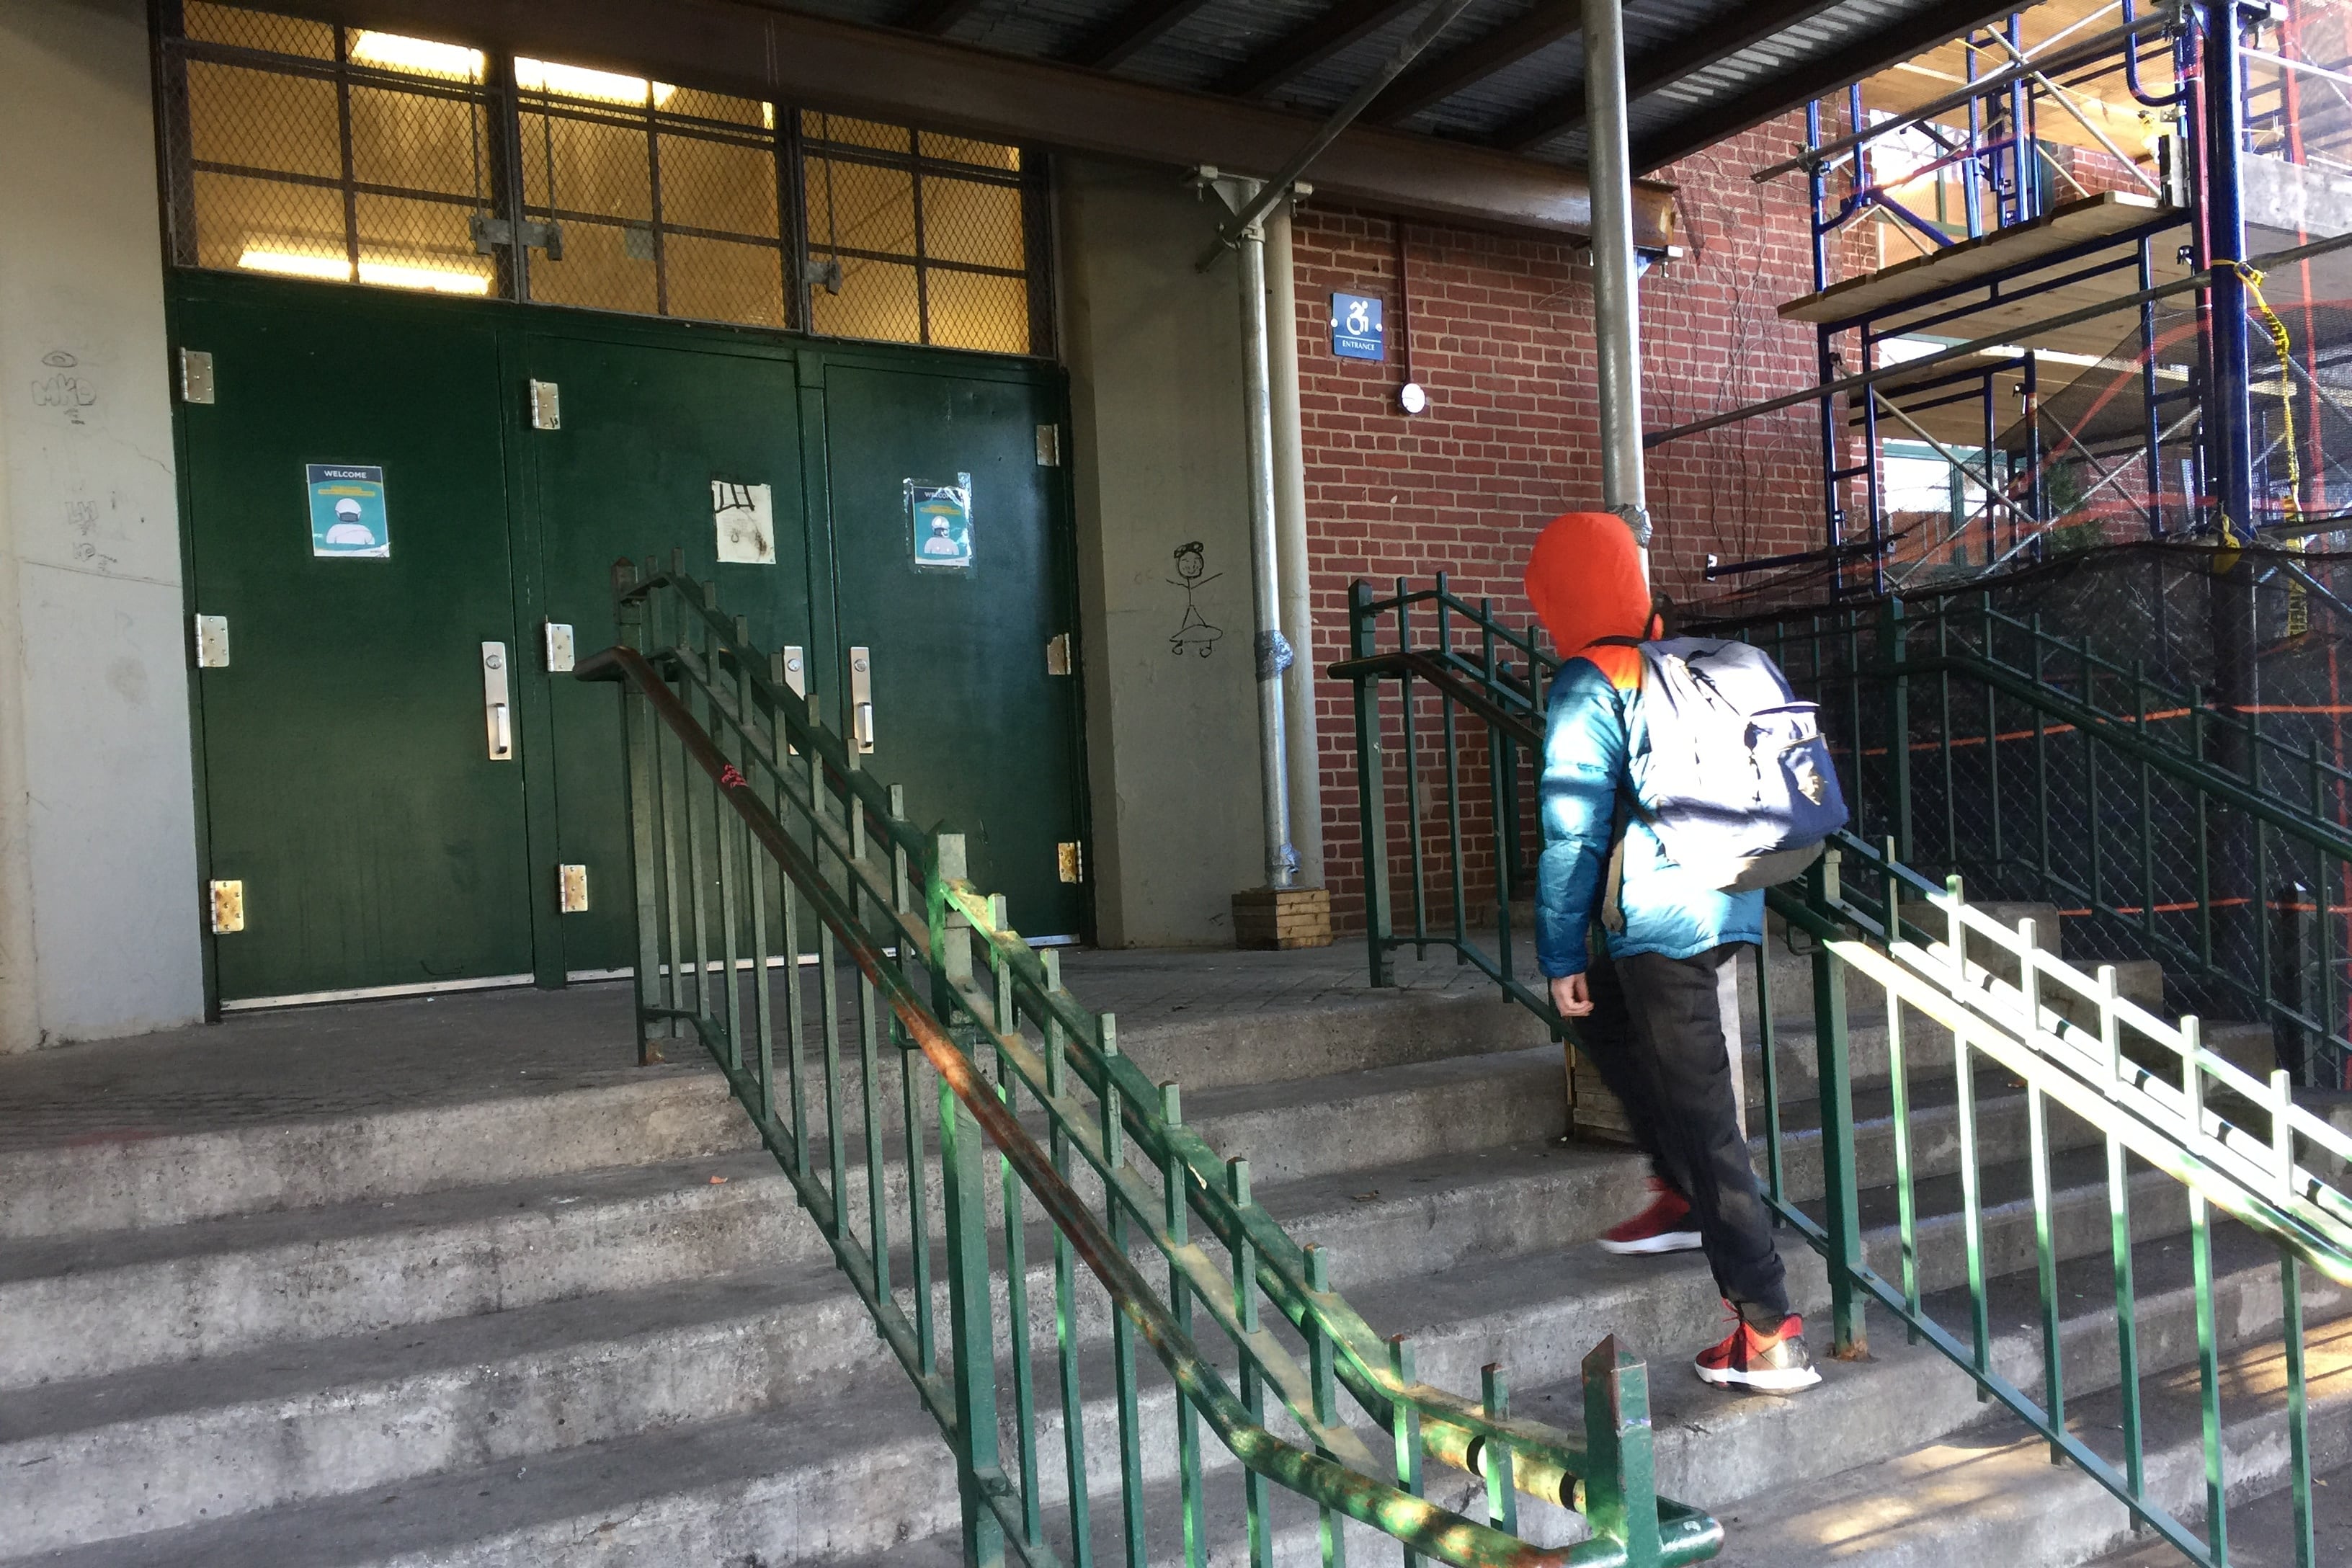 A student in a backpack walks up concrete steps toward green double doors at a school.